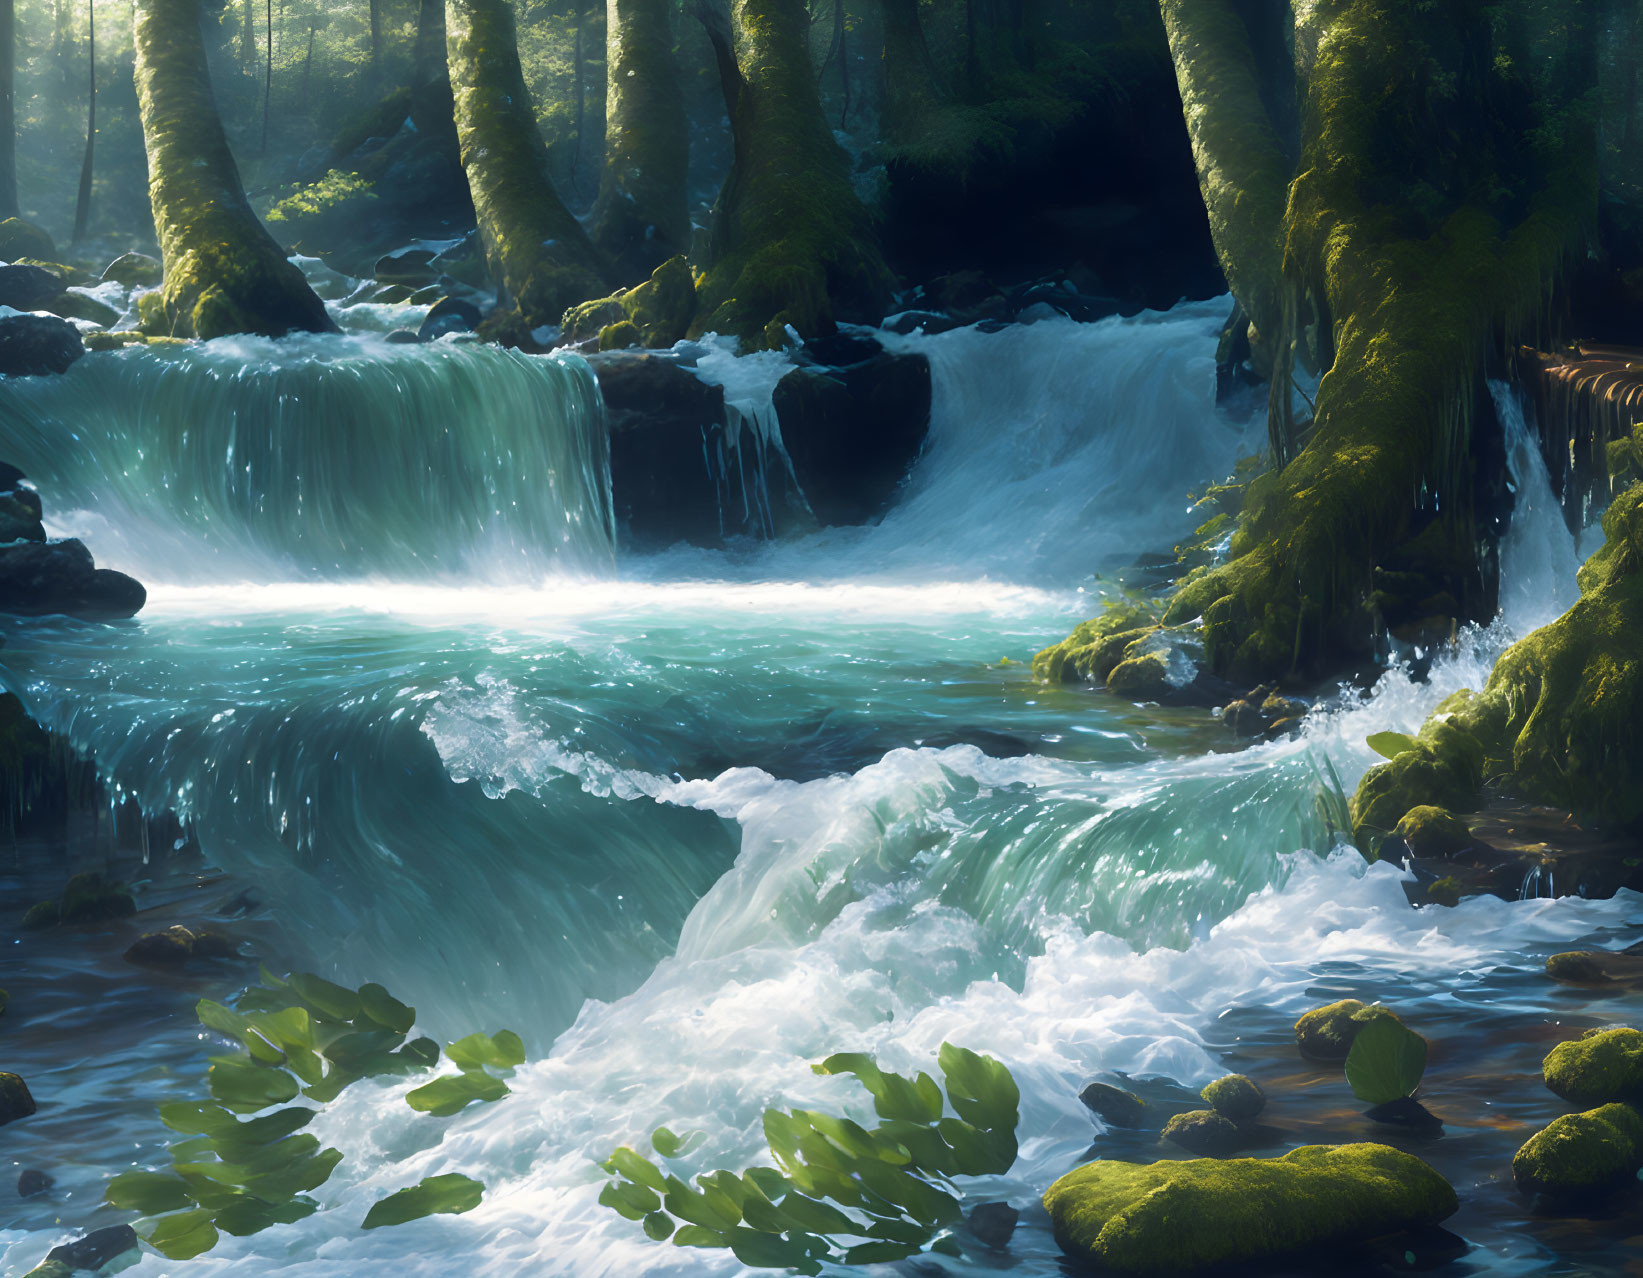 Tranquil forest scene with moss-covered trees, waterfall, and sunlight.